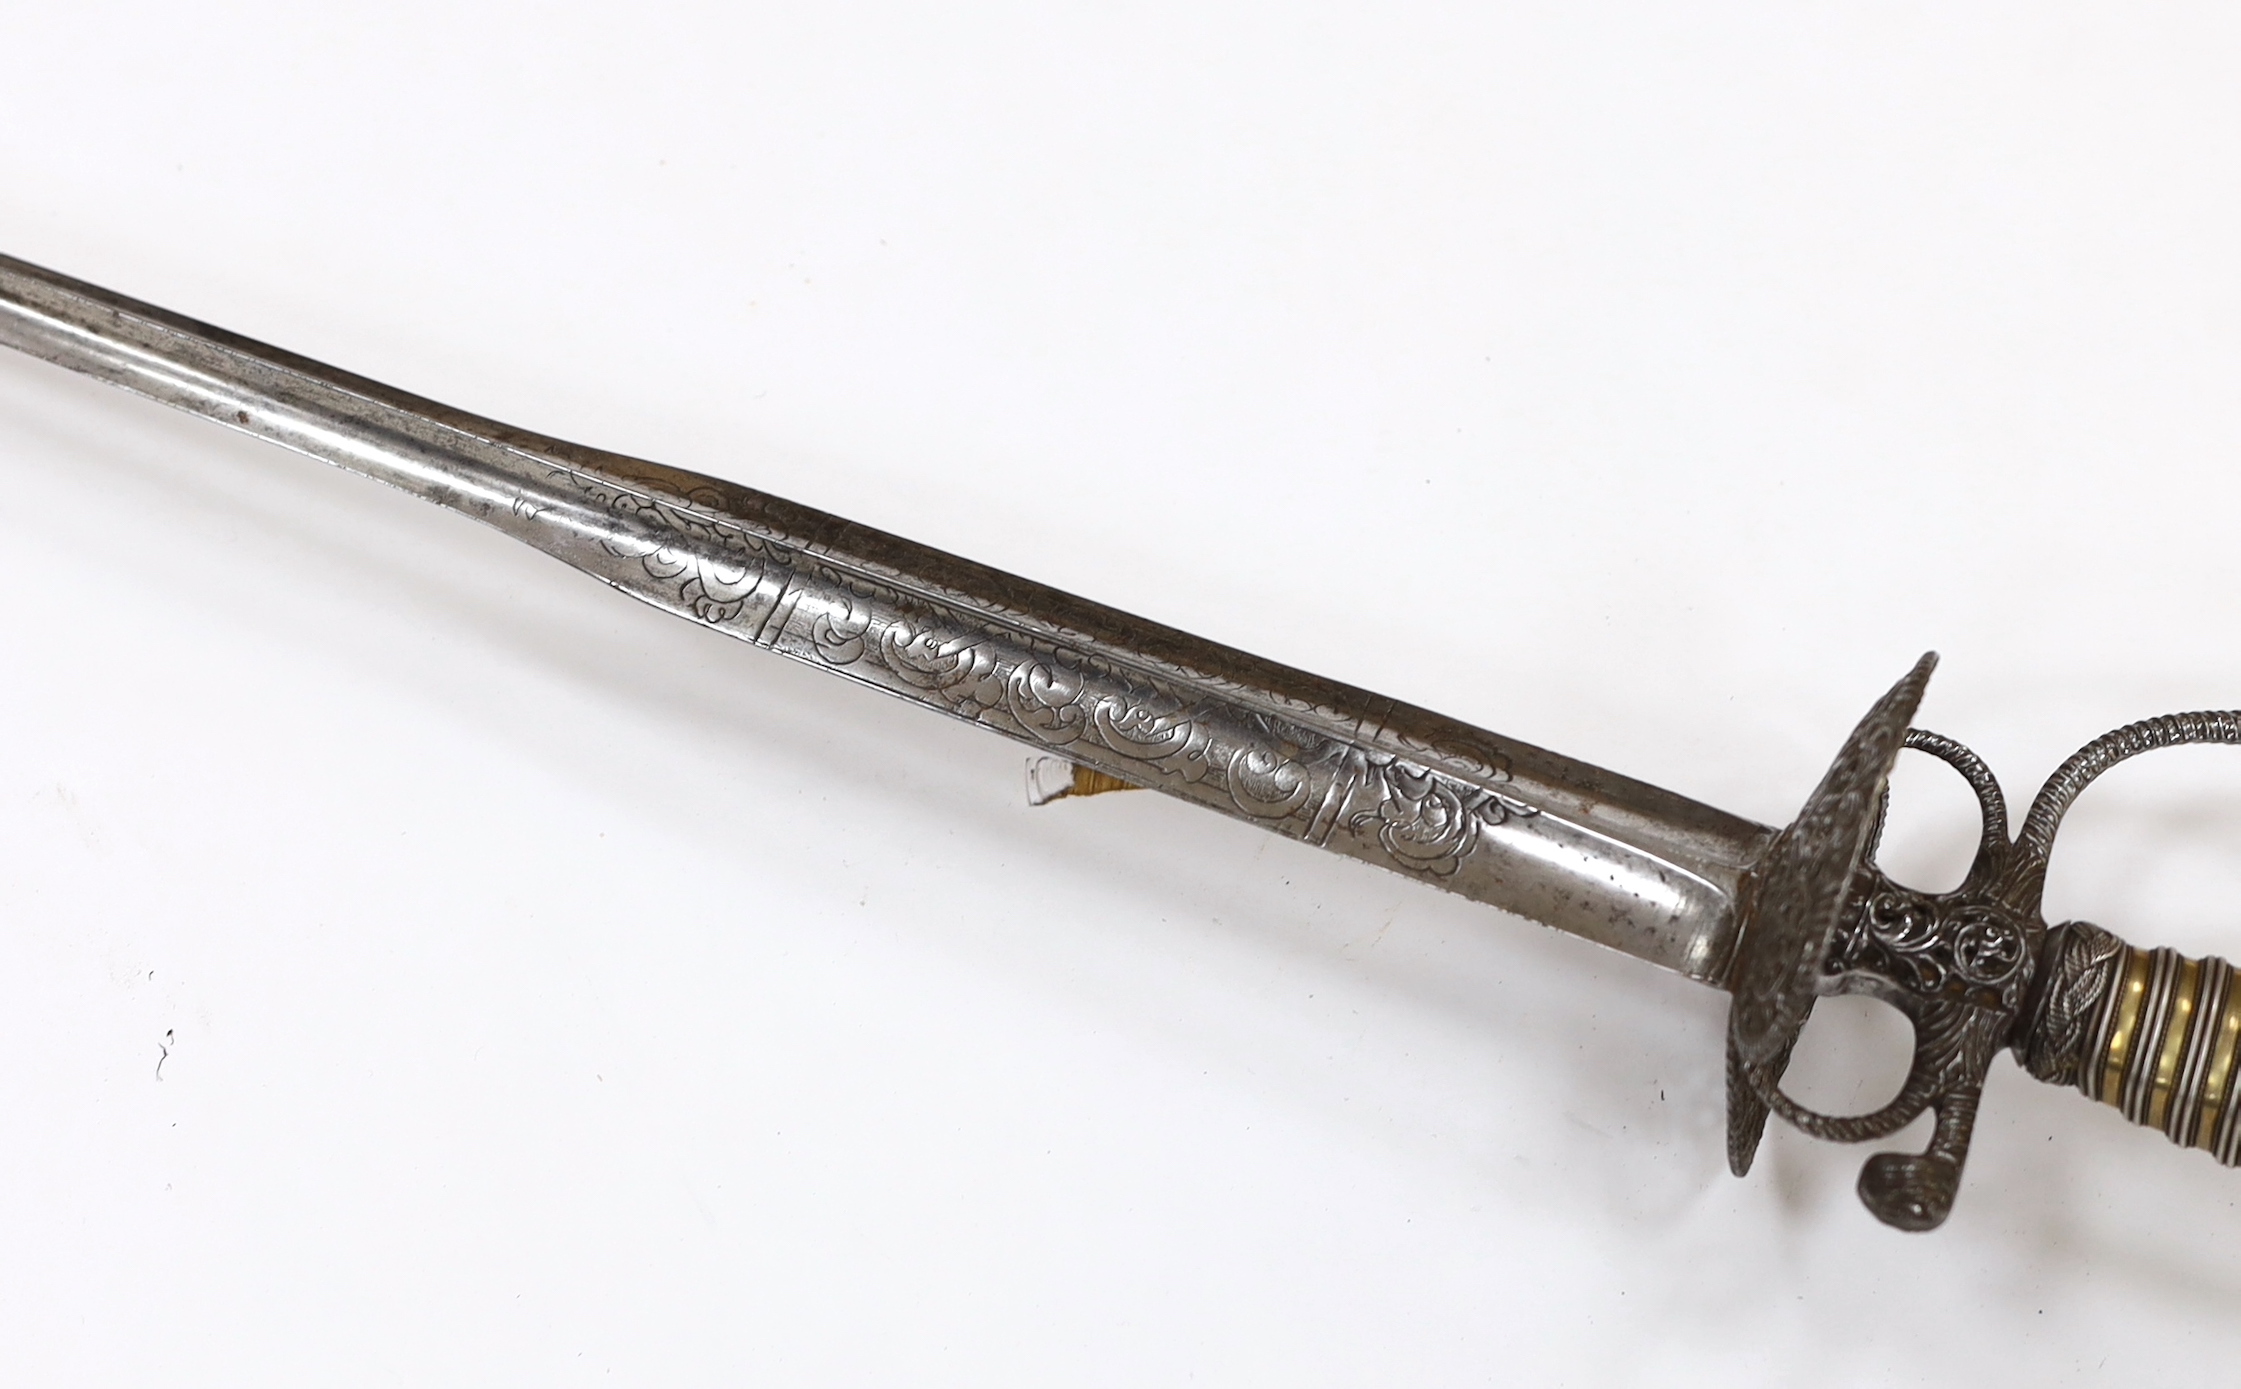 An English iron hilted small sword, c.1765, chiselled and pierced with scrolling devices and foliage, silver gilt tape and silver wire bound grip, colichemarde blade etched with scrolls and squirrel, blade 81.5cm